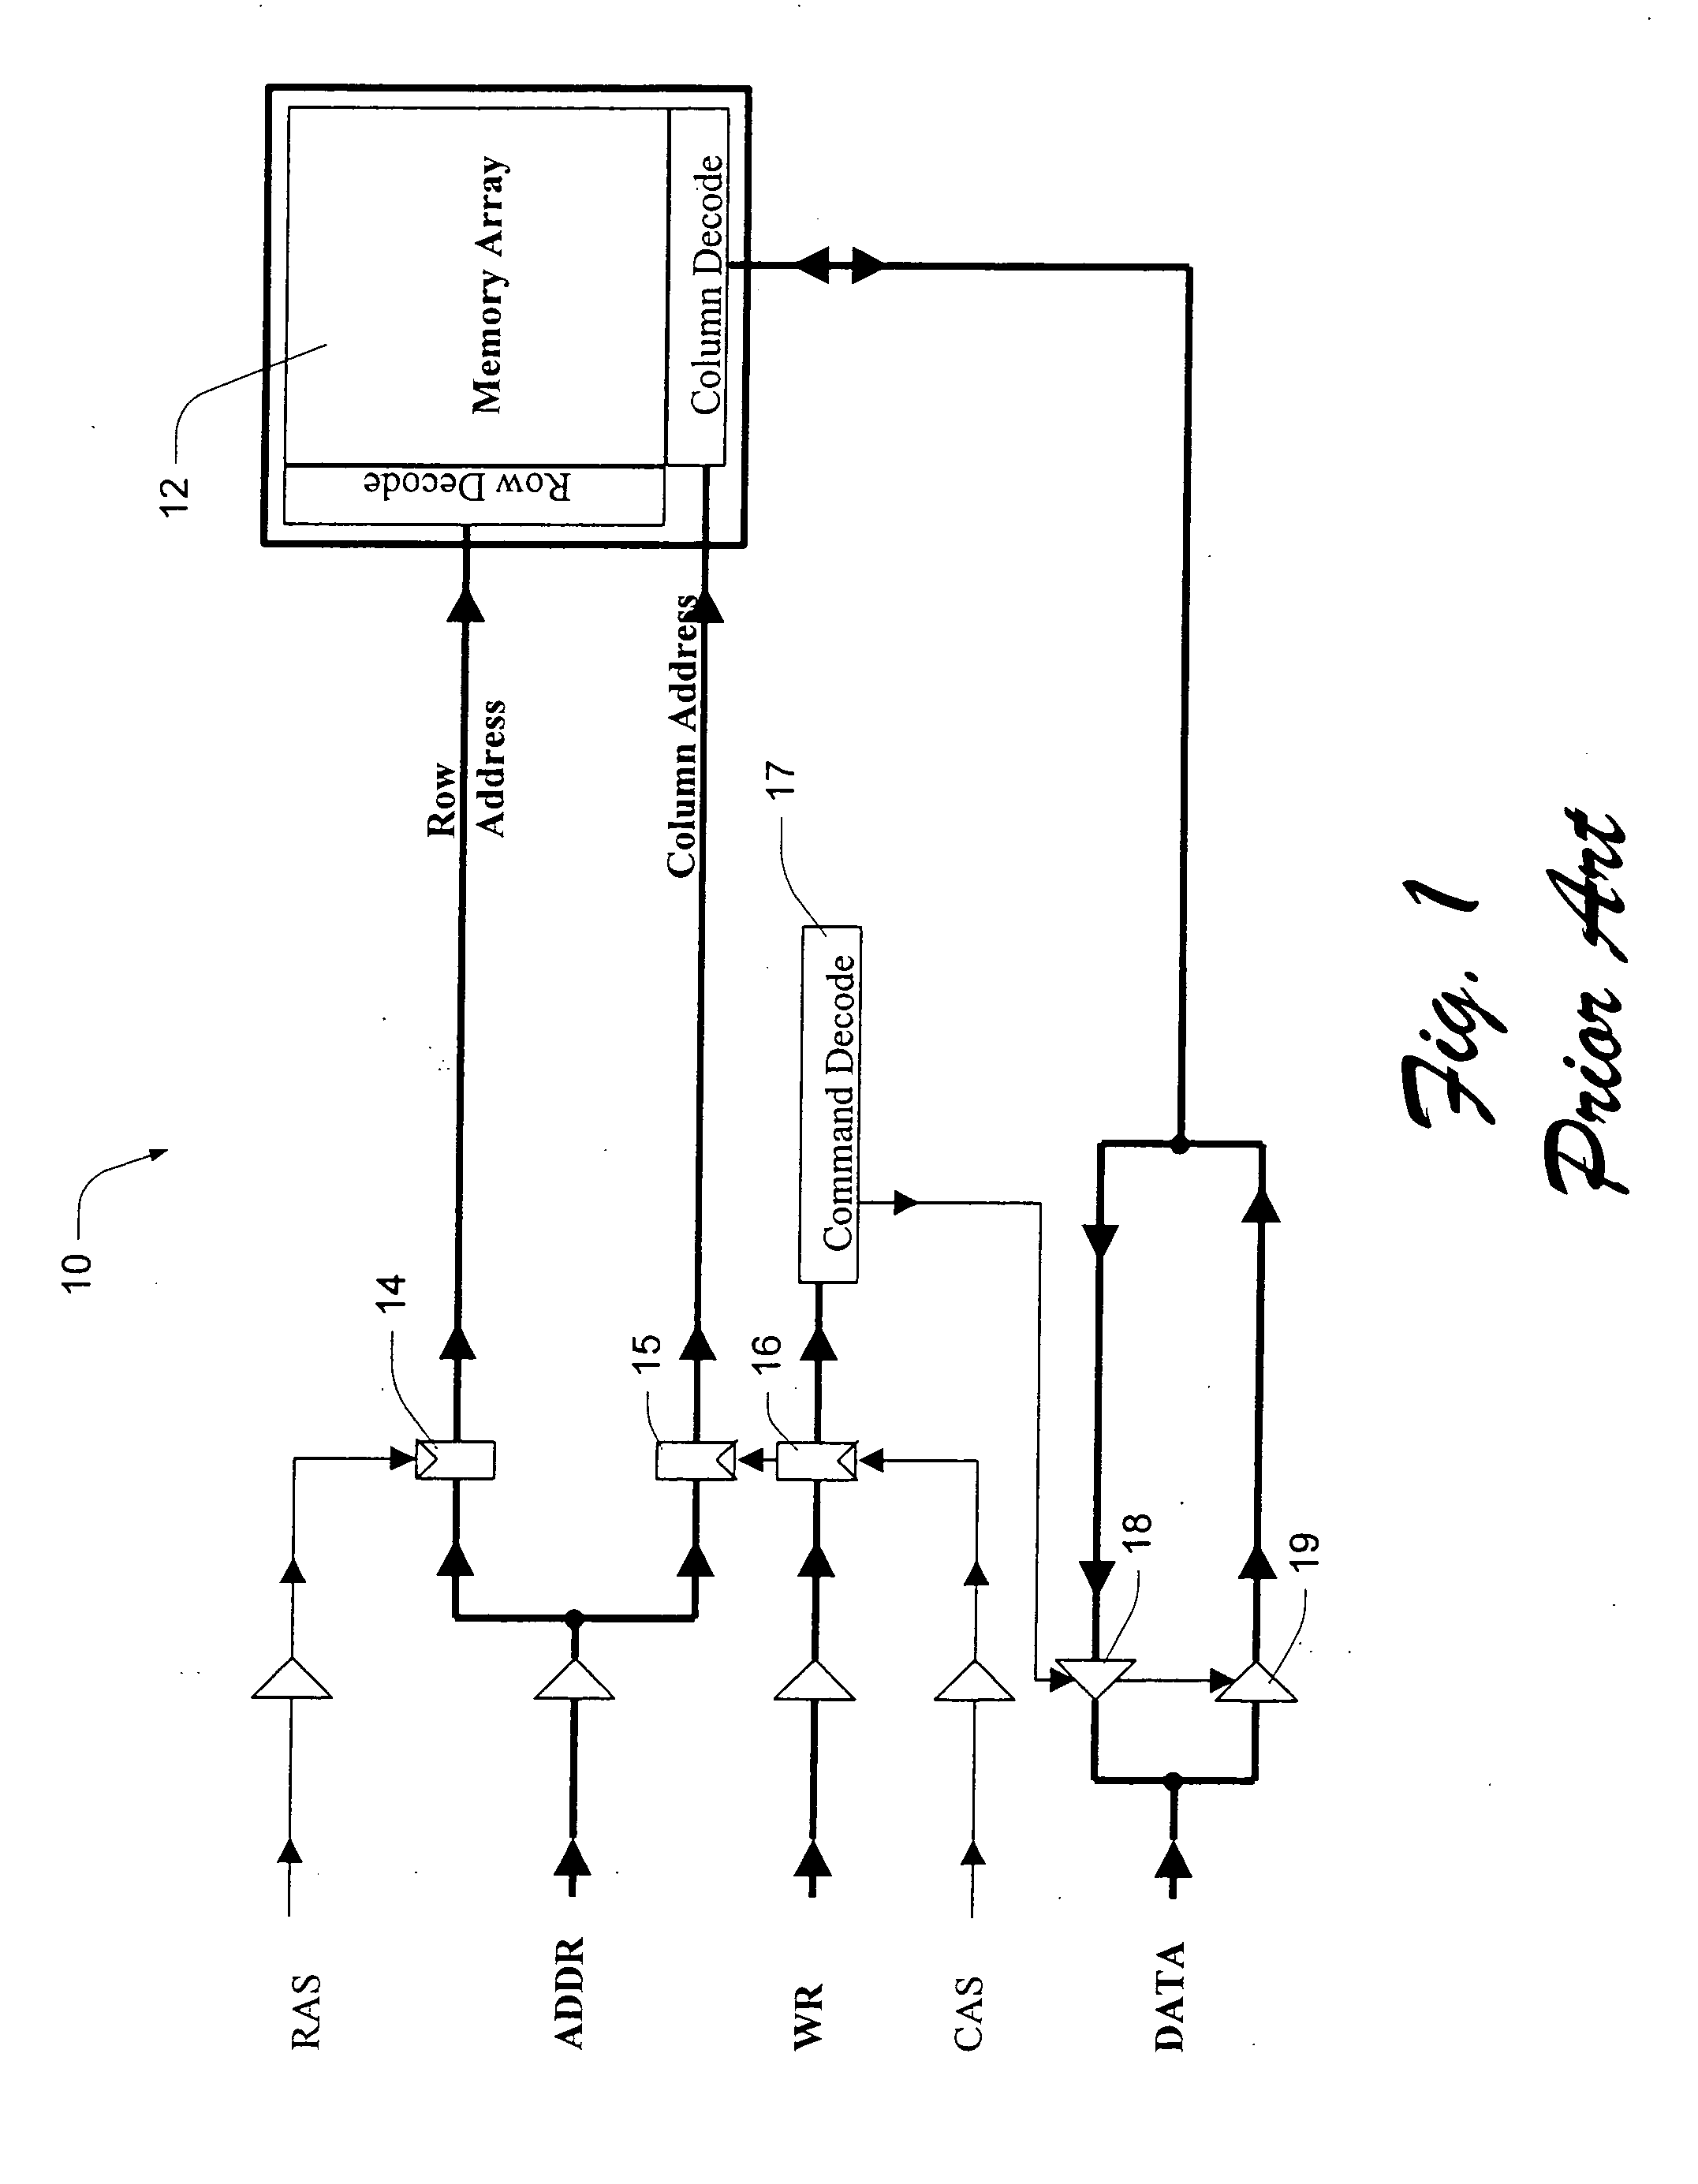 Asynchronous, high-bandwidth memory component using calibrated timing elements